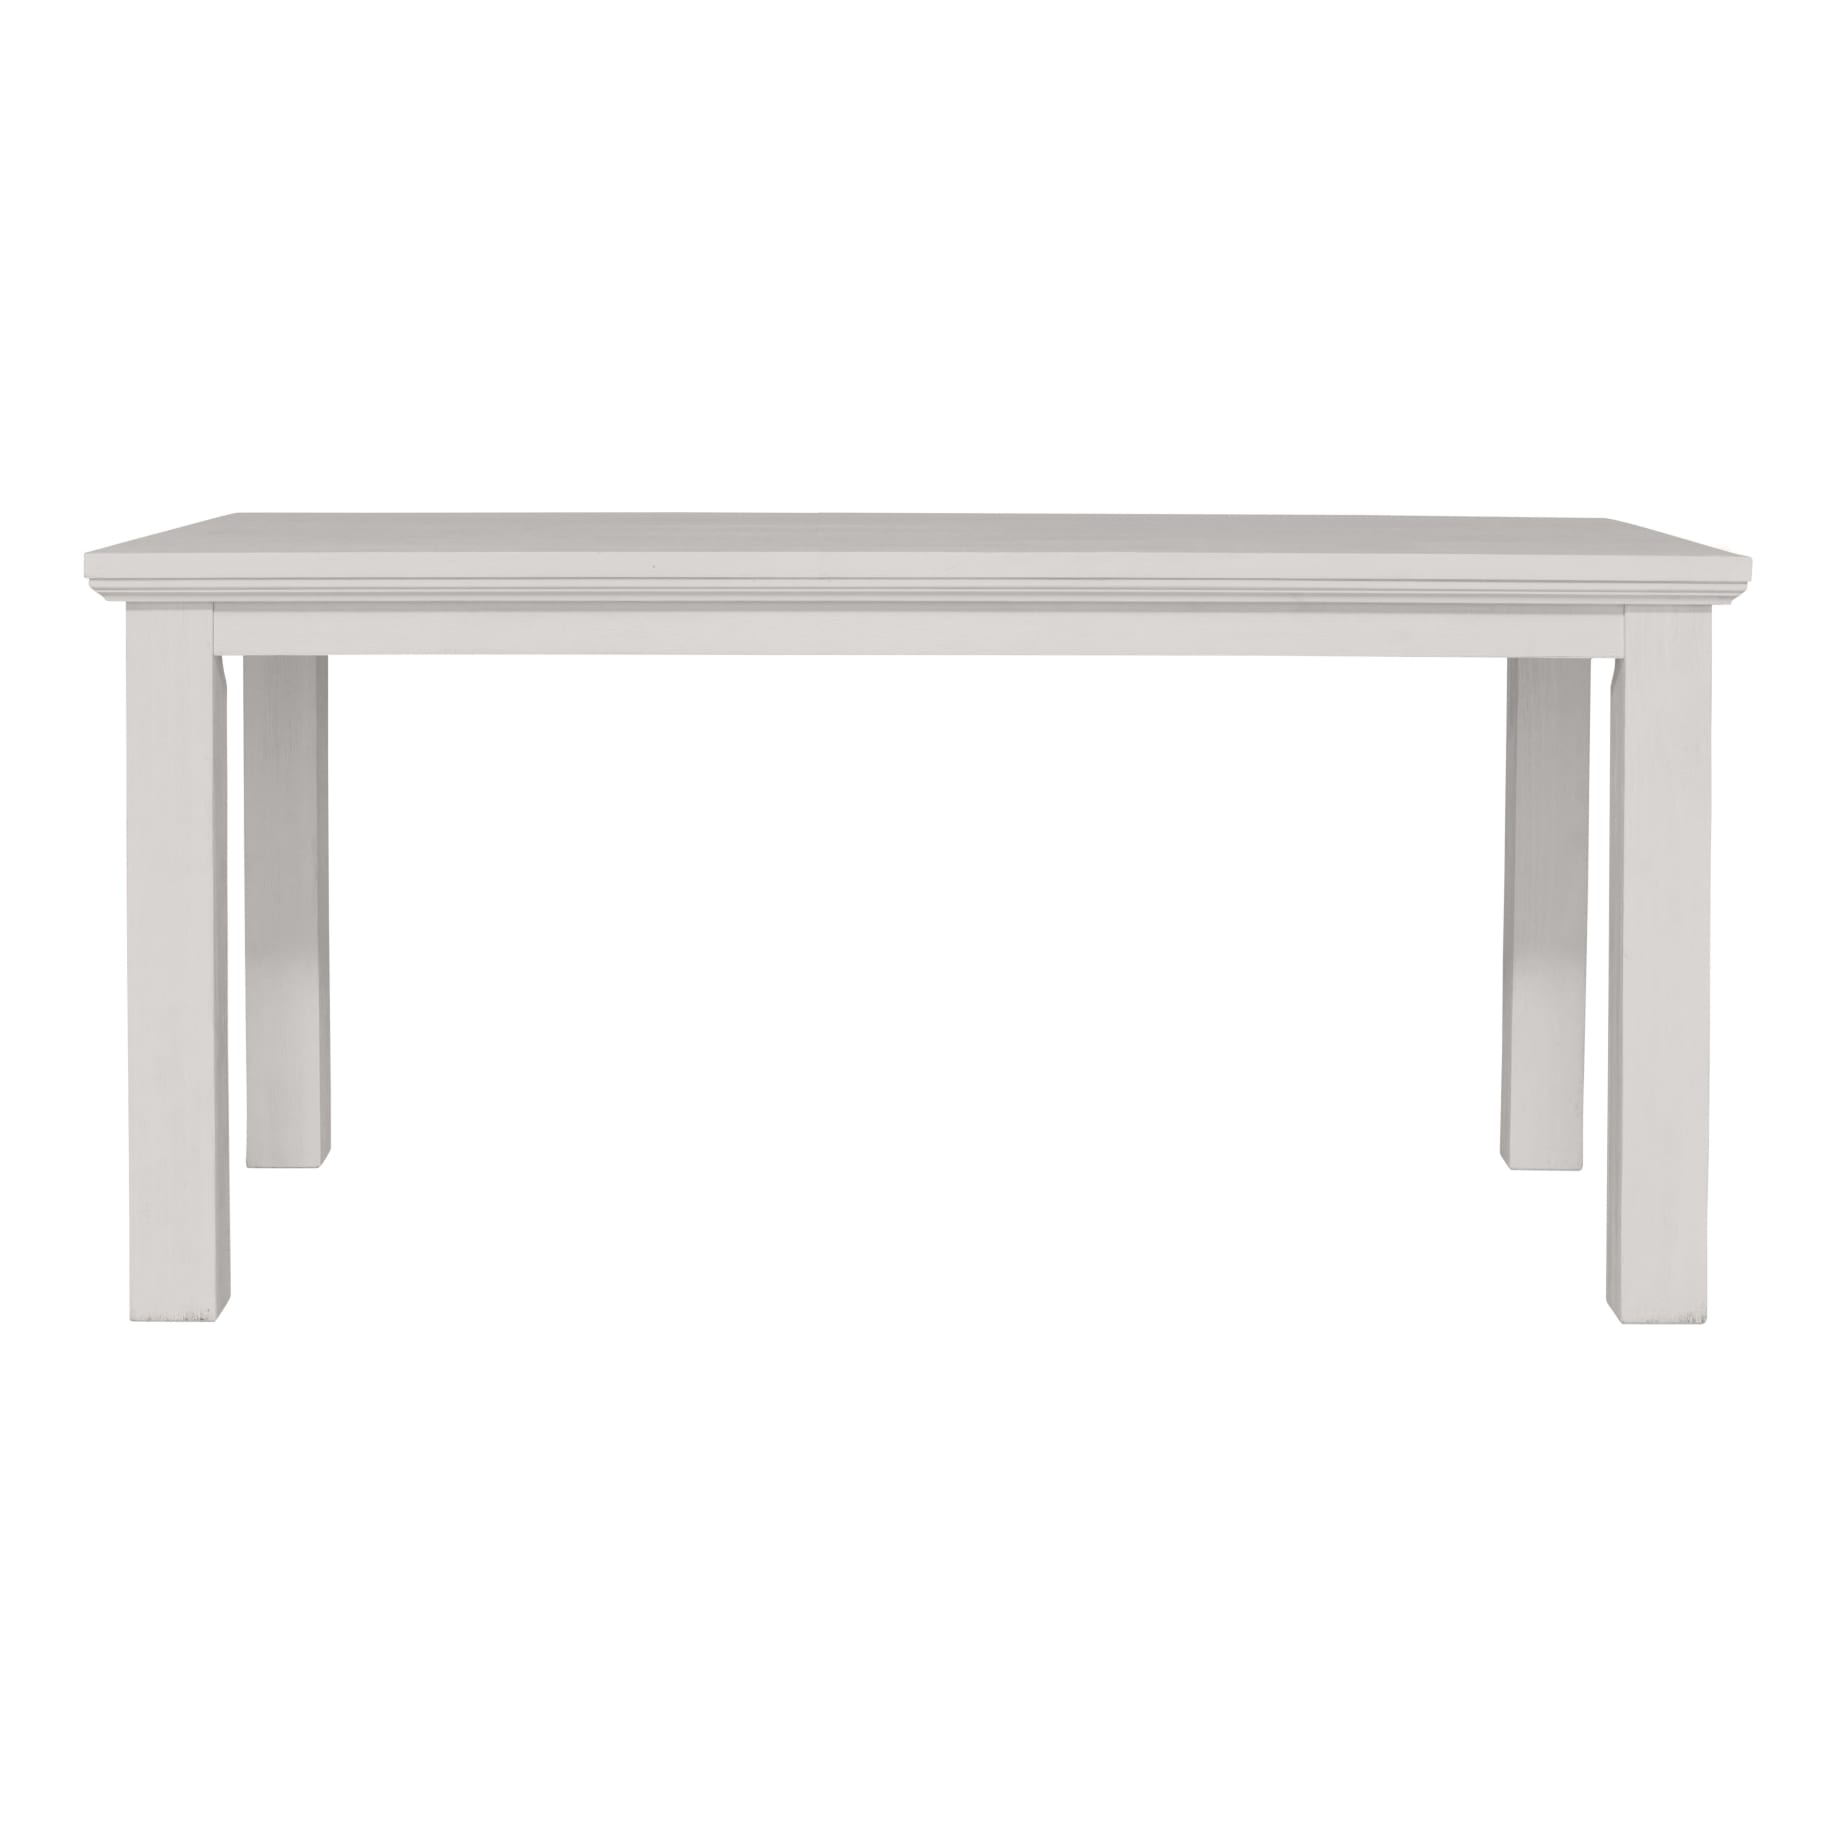 Hamptons Dining Table 180cm in White